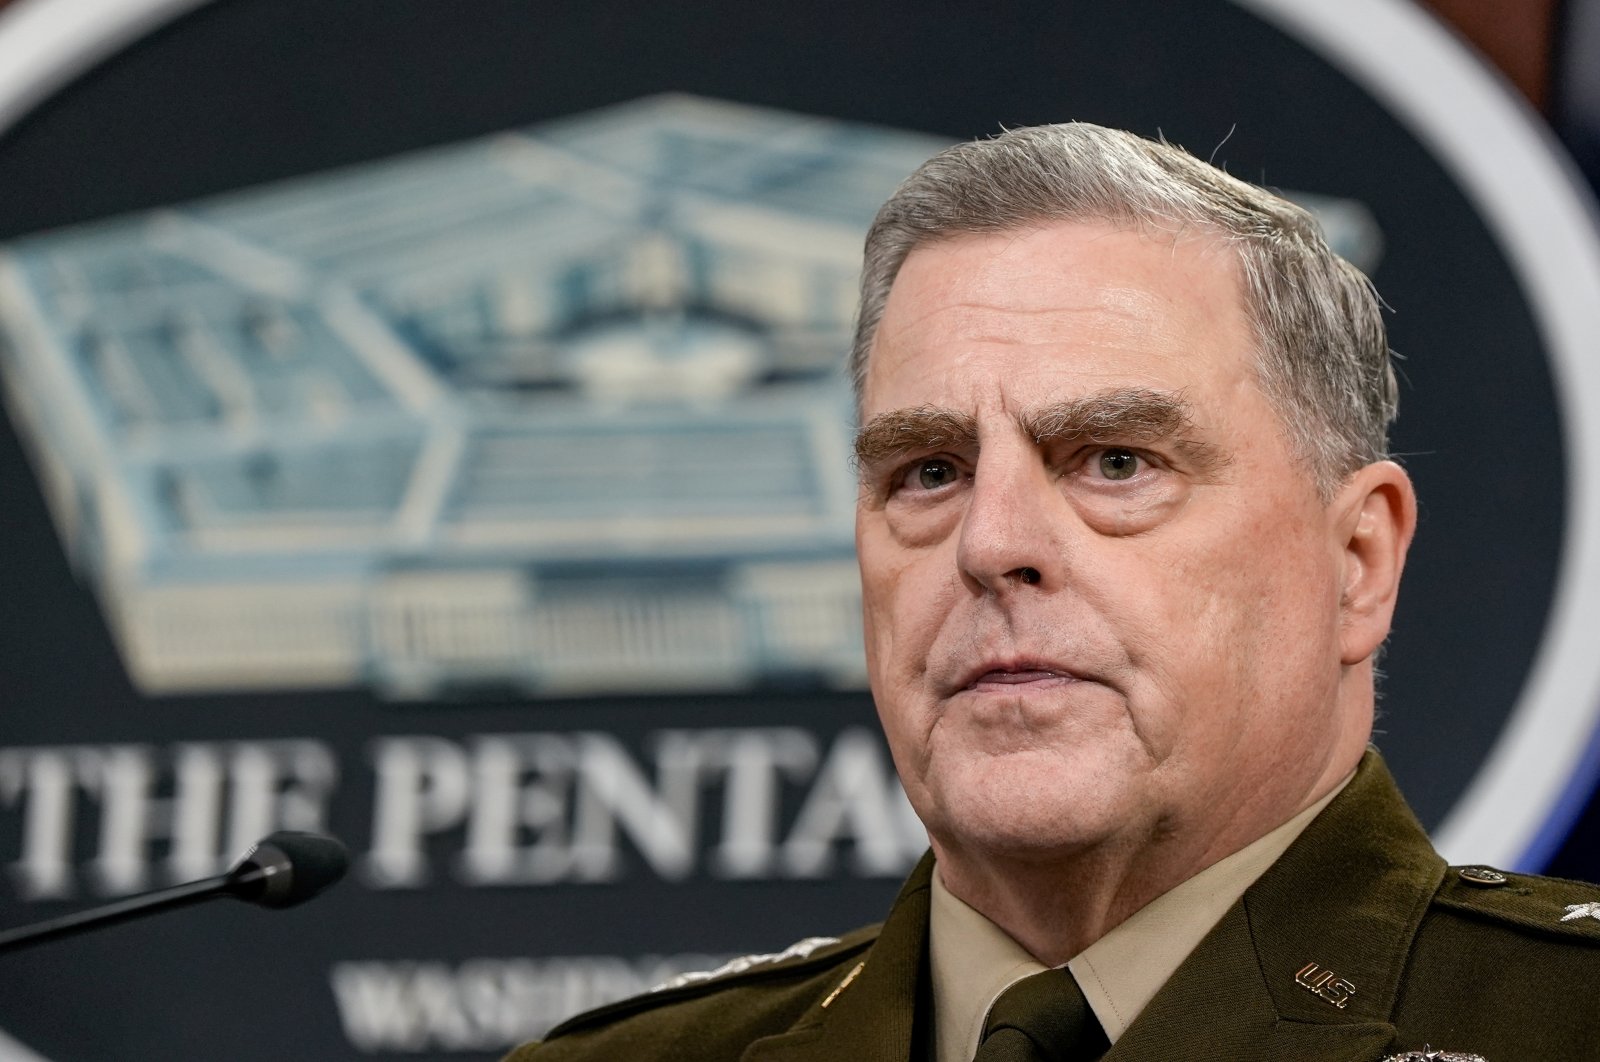 Chairman of the Joint Chiefs of Staff General Mark Milley briefs reporters at the Pentagon as the U.S. military nears the formal end of its mission in Afghanistan, in Arlington, Virginia, U.S., July 21, 2021. (Reuters Photo)